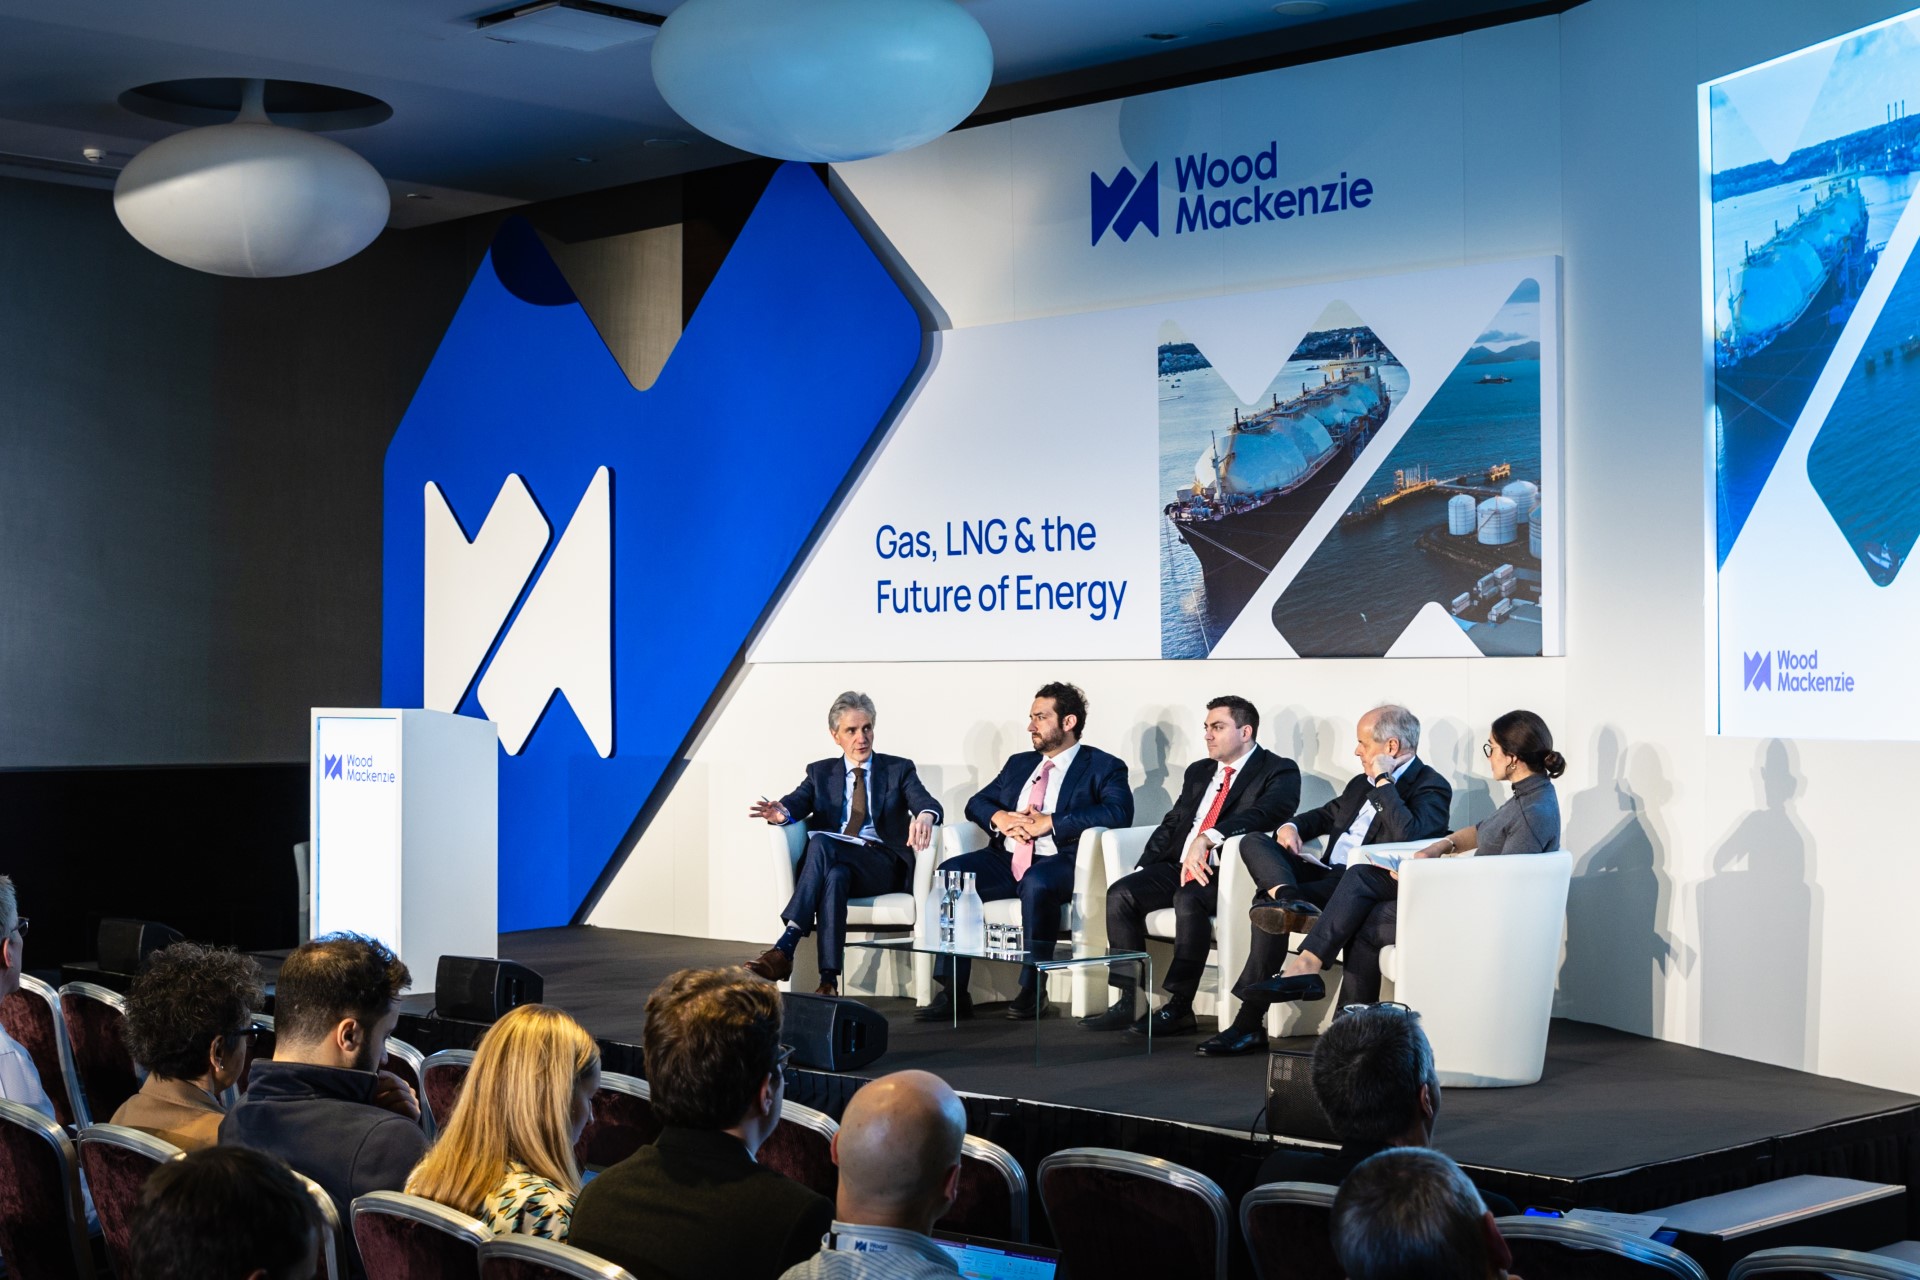 Wood Mackenzie’s gas and LNG conference returns from October 22-23